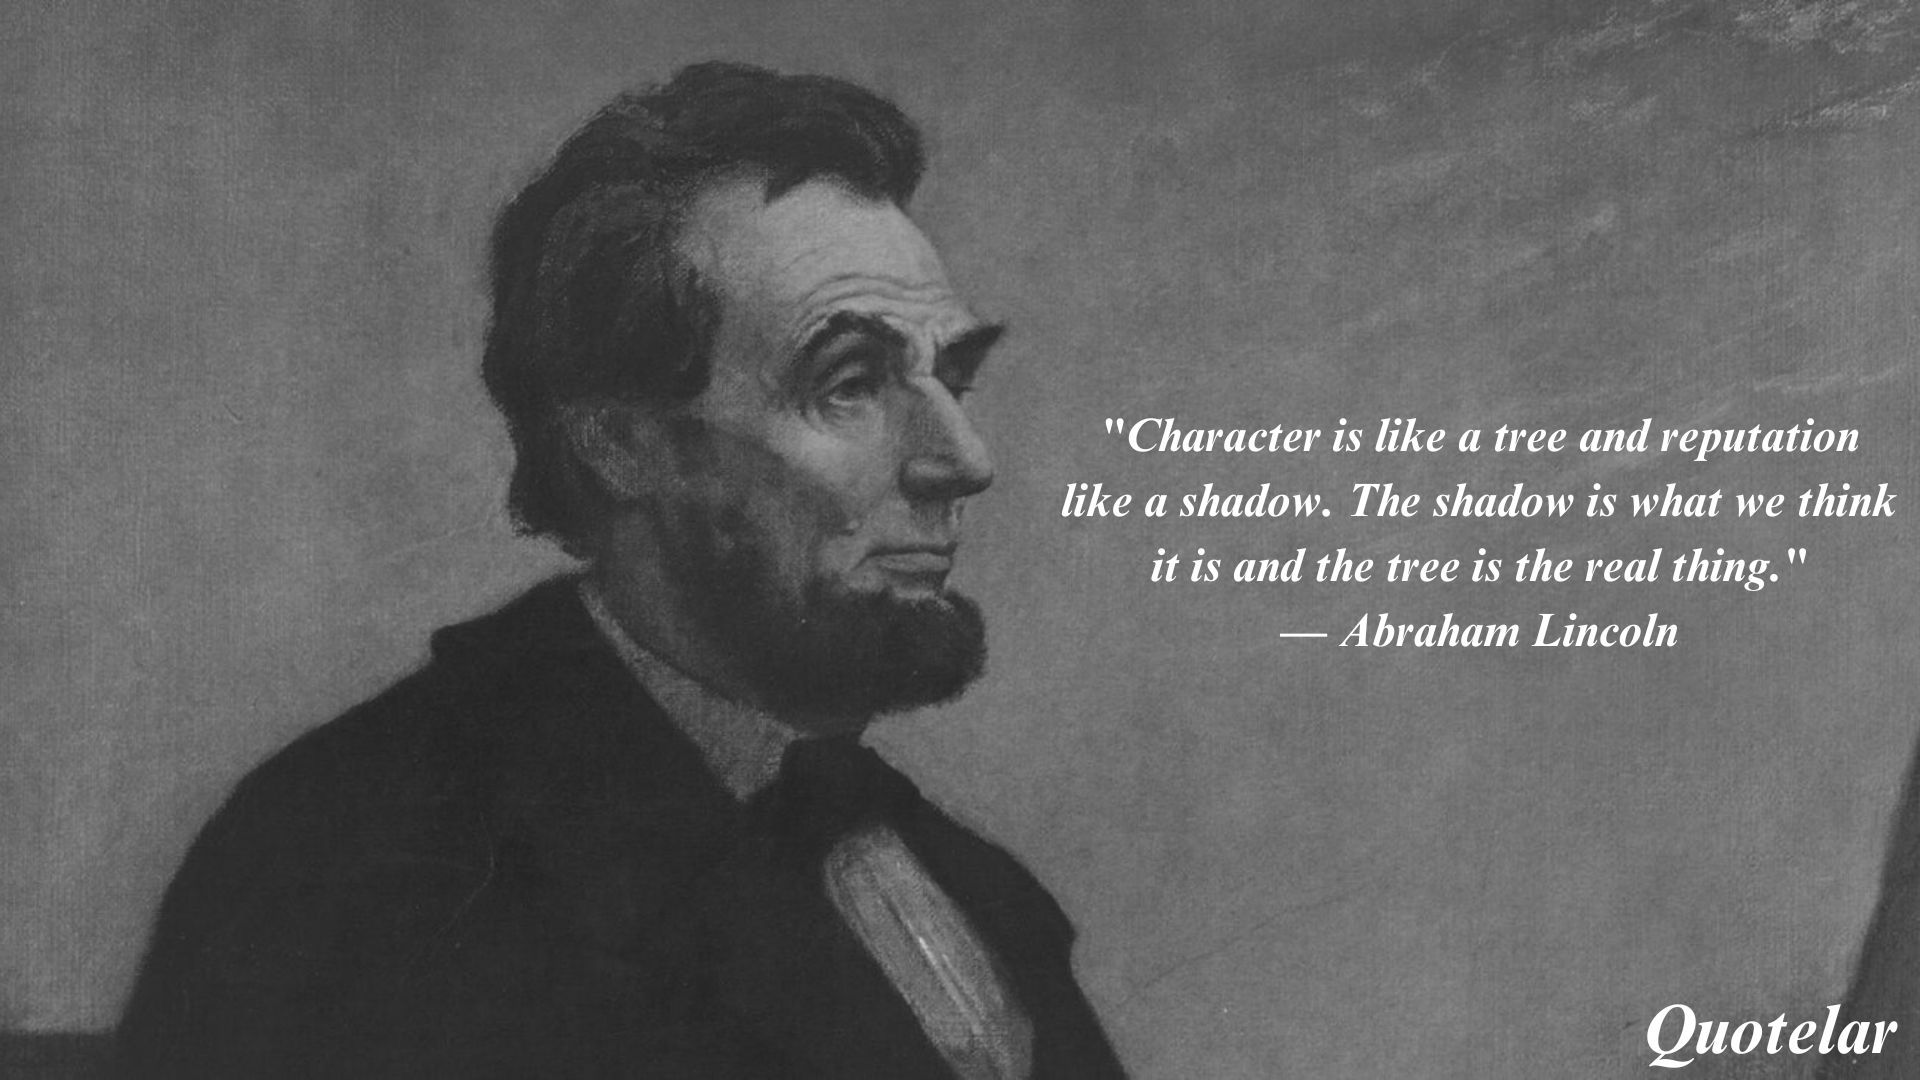 Top 10 Quotes by Abraham Lincoln